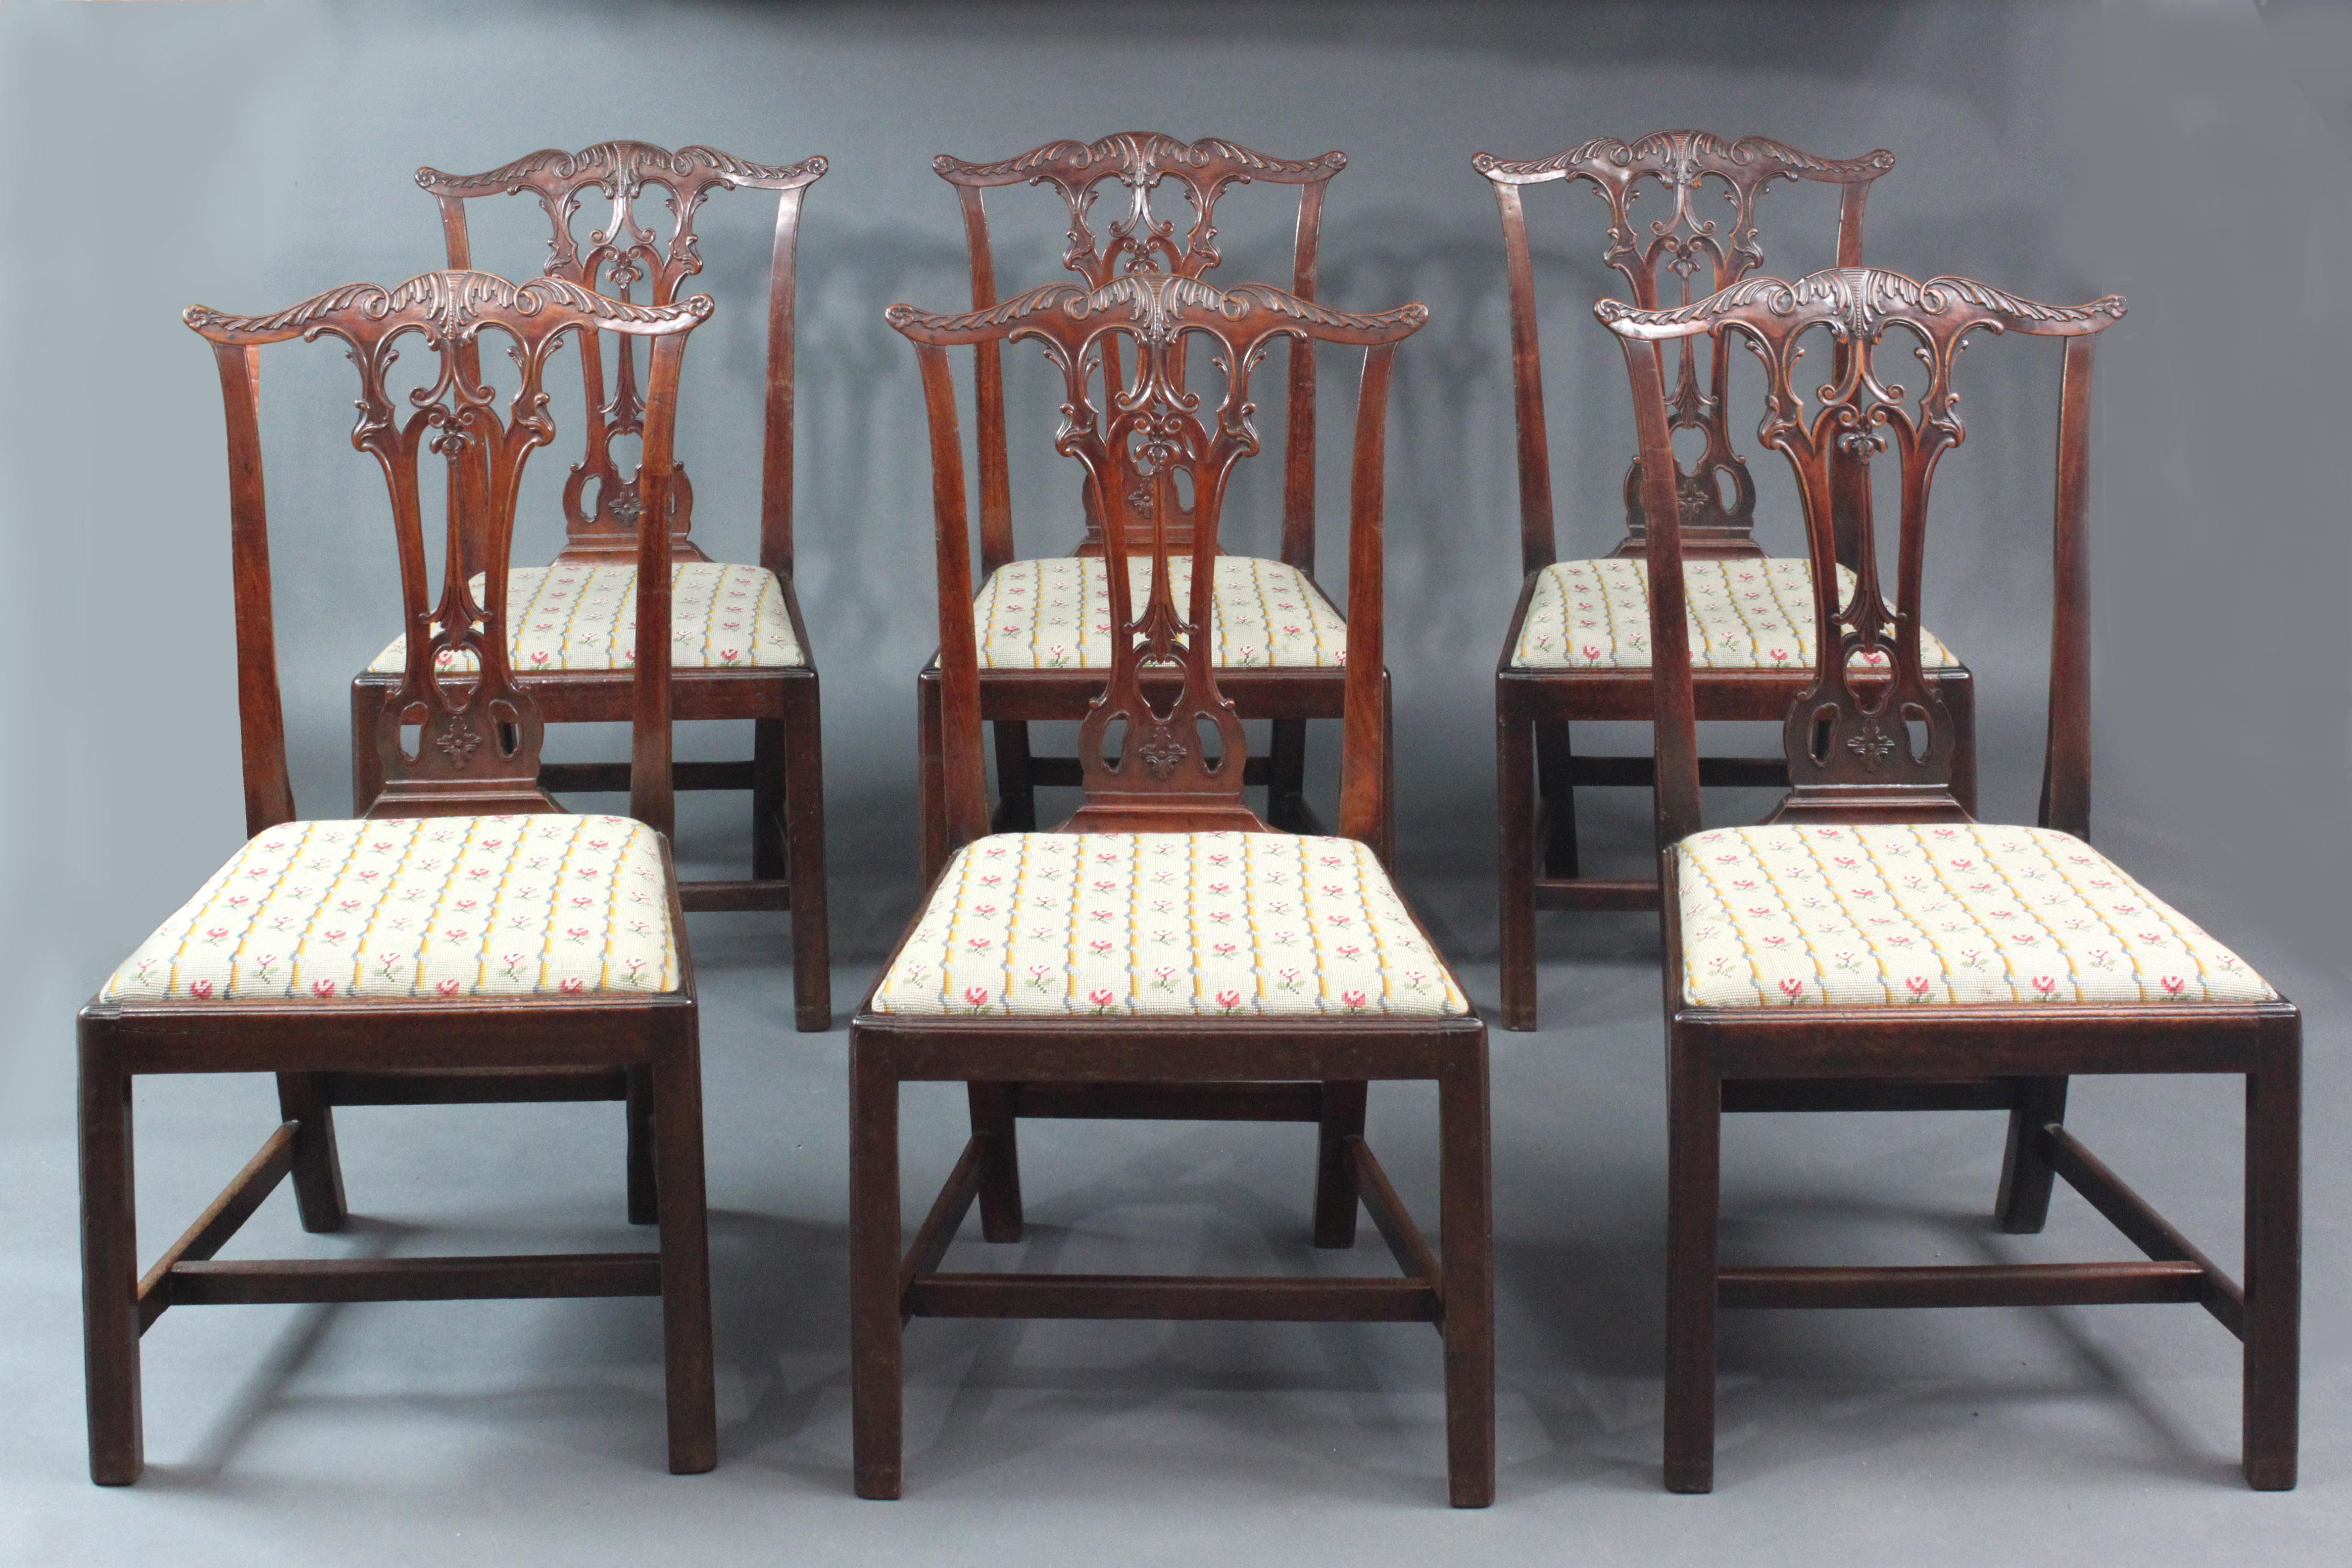 English Set of 6 George III Period Chairs after a Design by Thomas Chippendale